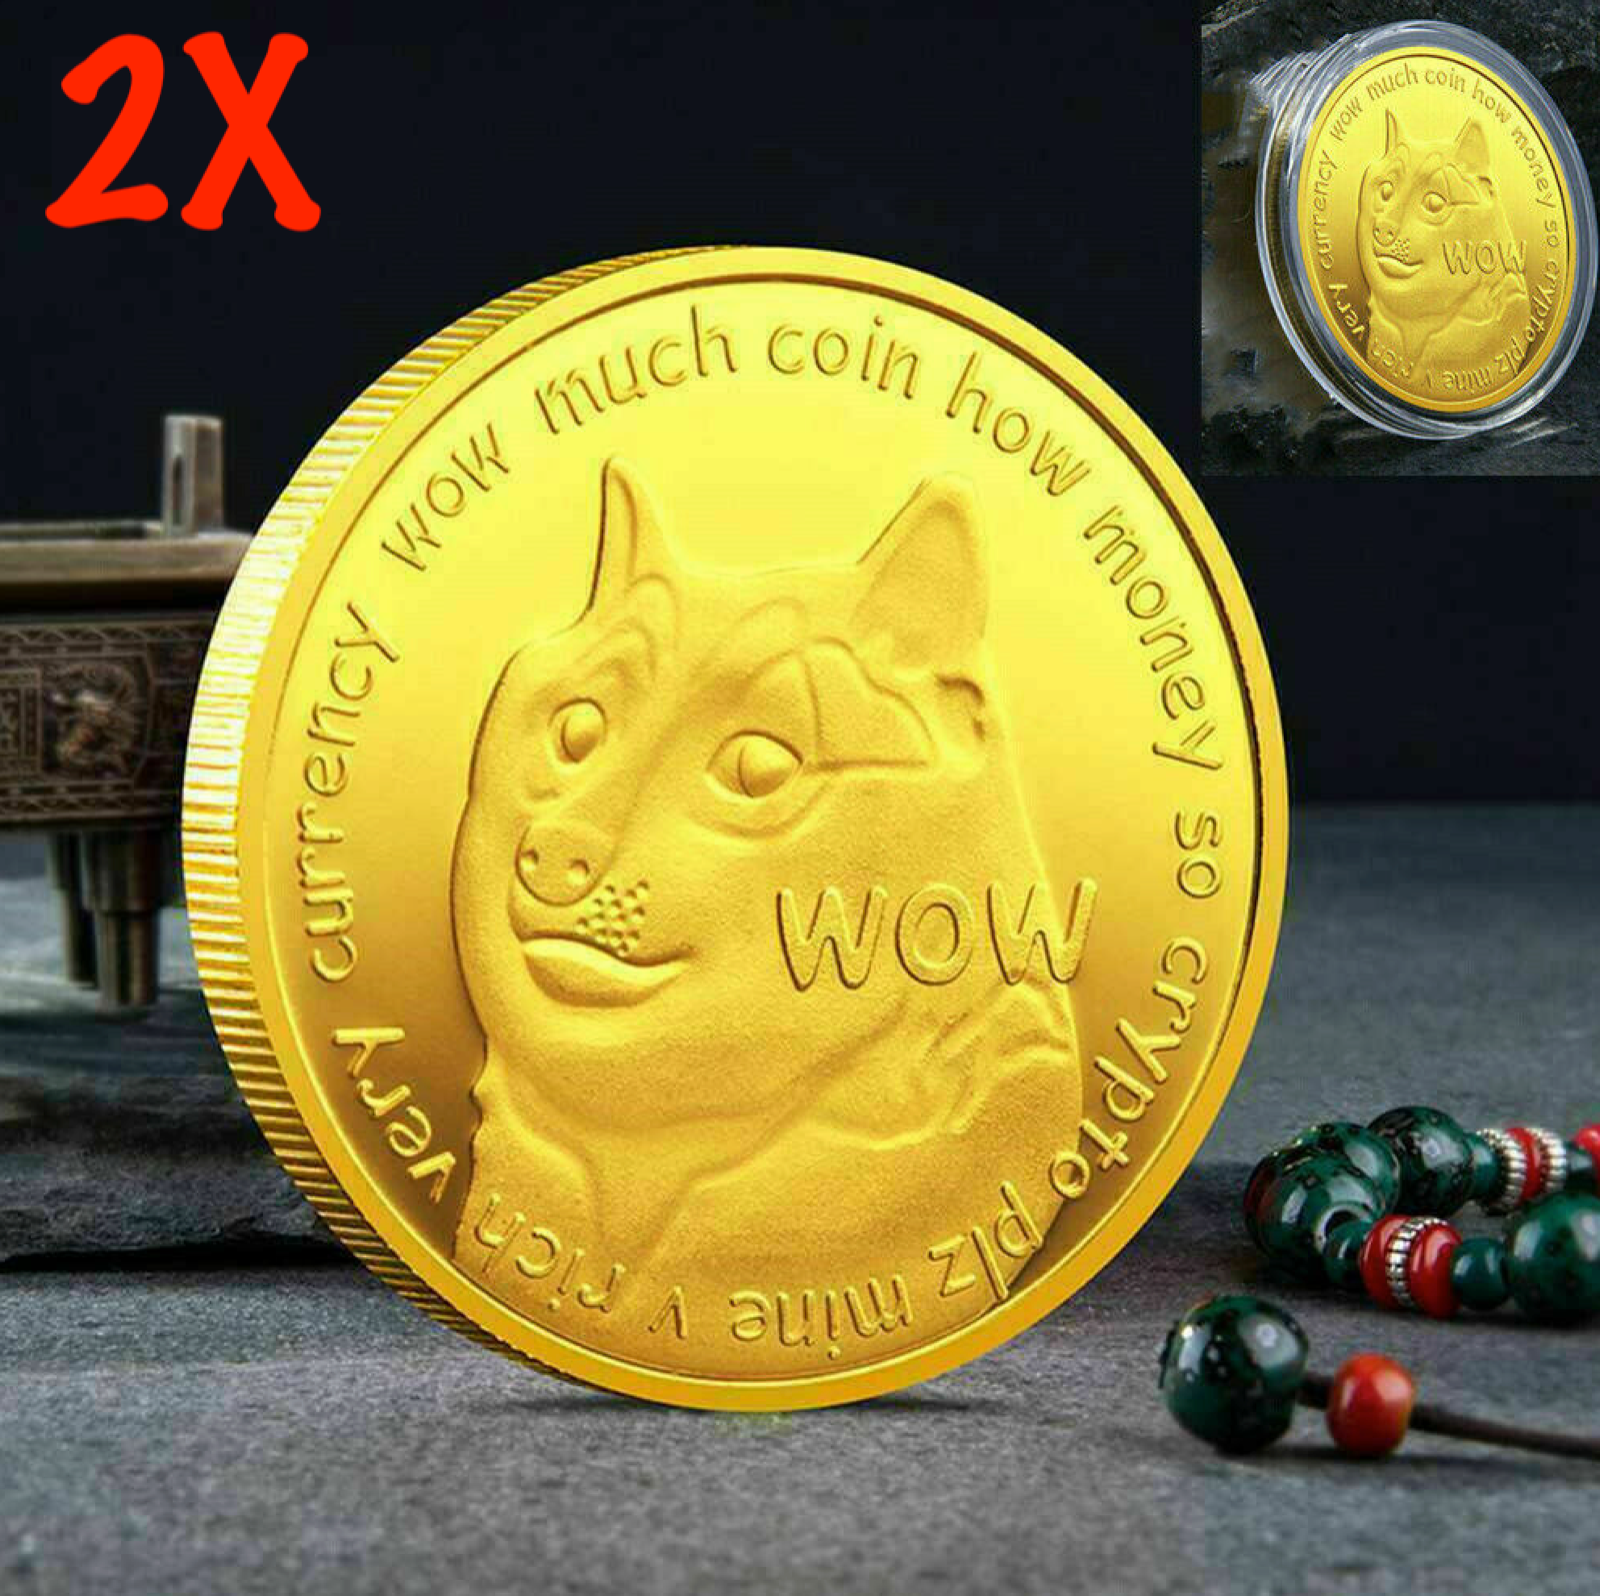 2x DogeCoin - Doge Coin - CryptoCurrency Physical Gold Plated Coin - Shiba Inu!